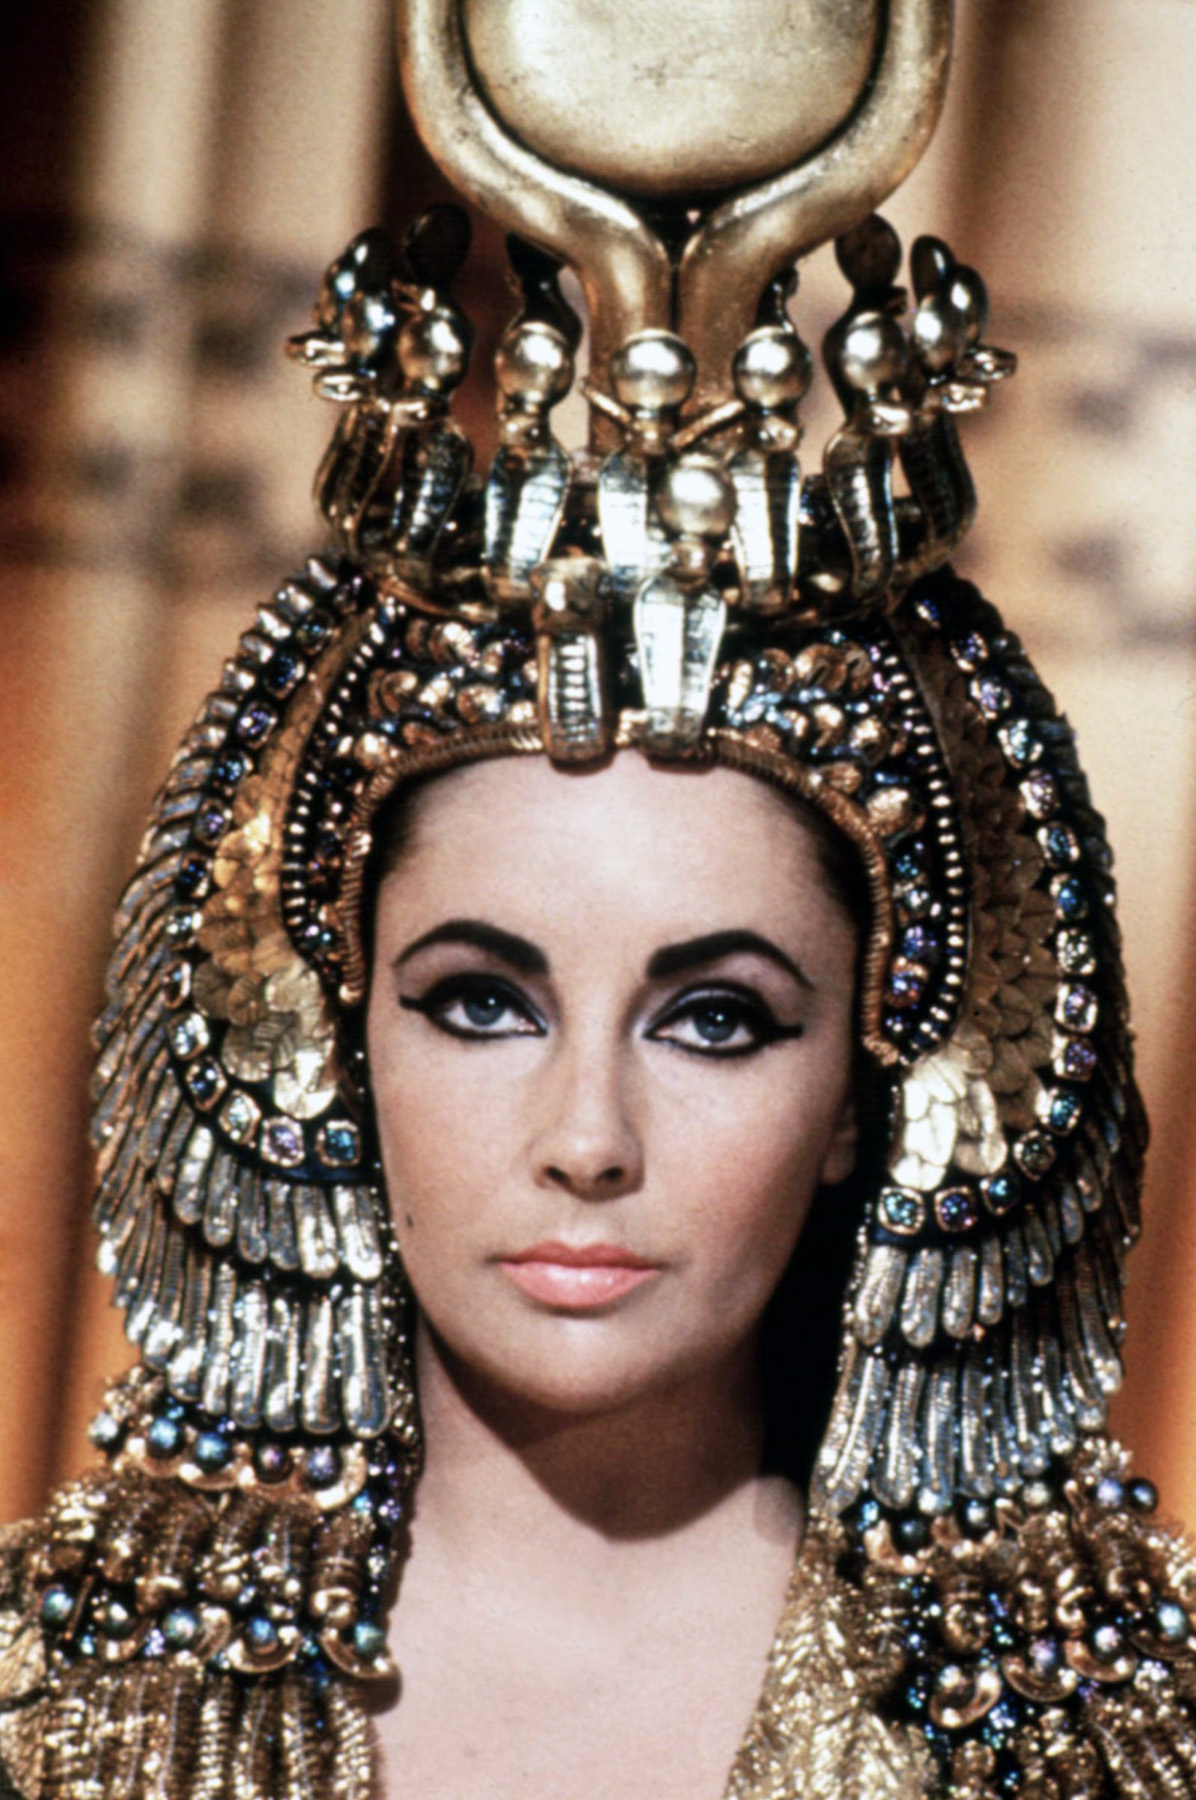 http://www.doctormacro.com/Images/Taylor,%20Elizabeth/Annex/Annex%20-%20Taylor,%20Elizabeth%20(Cleopatra)_01.jpg